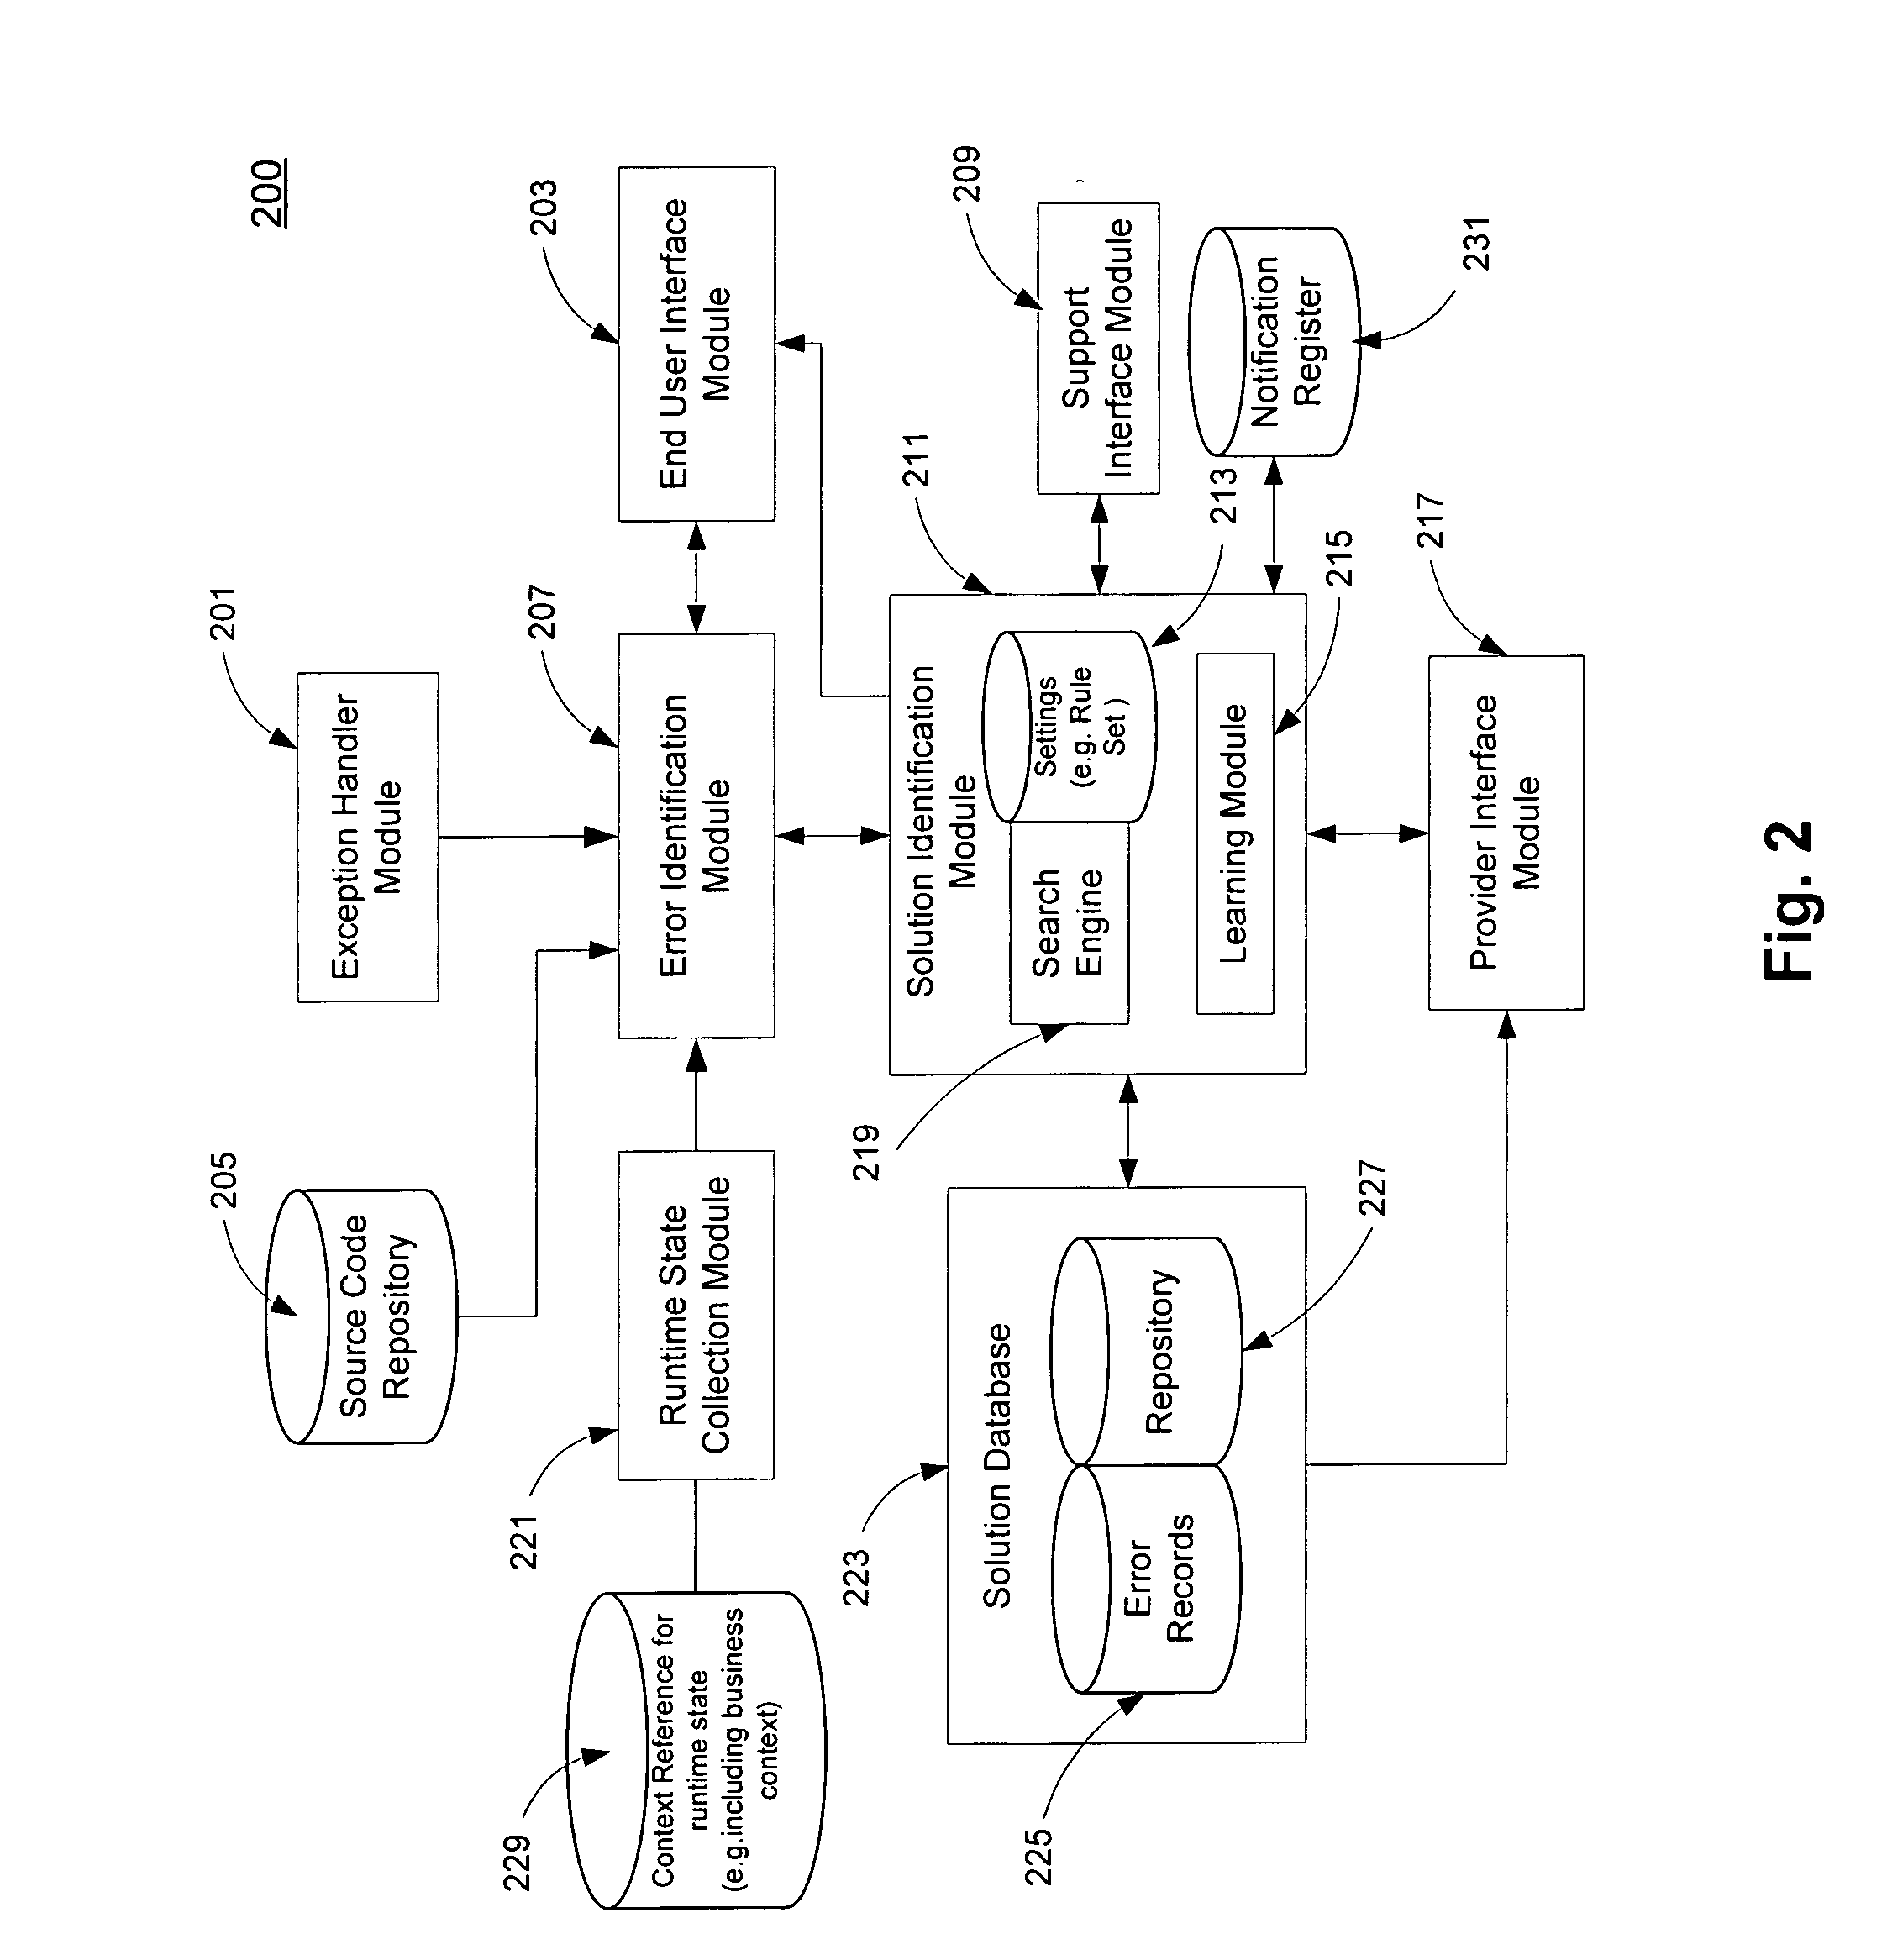 Method and apparatus for runtime error handling